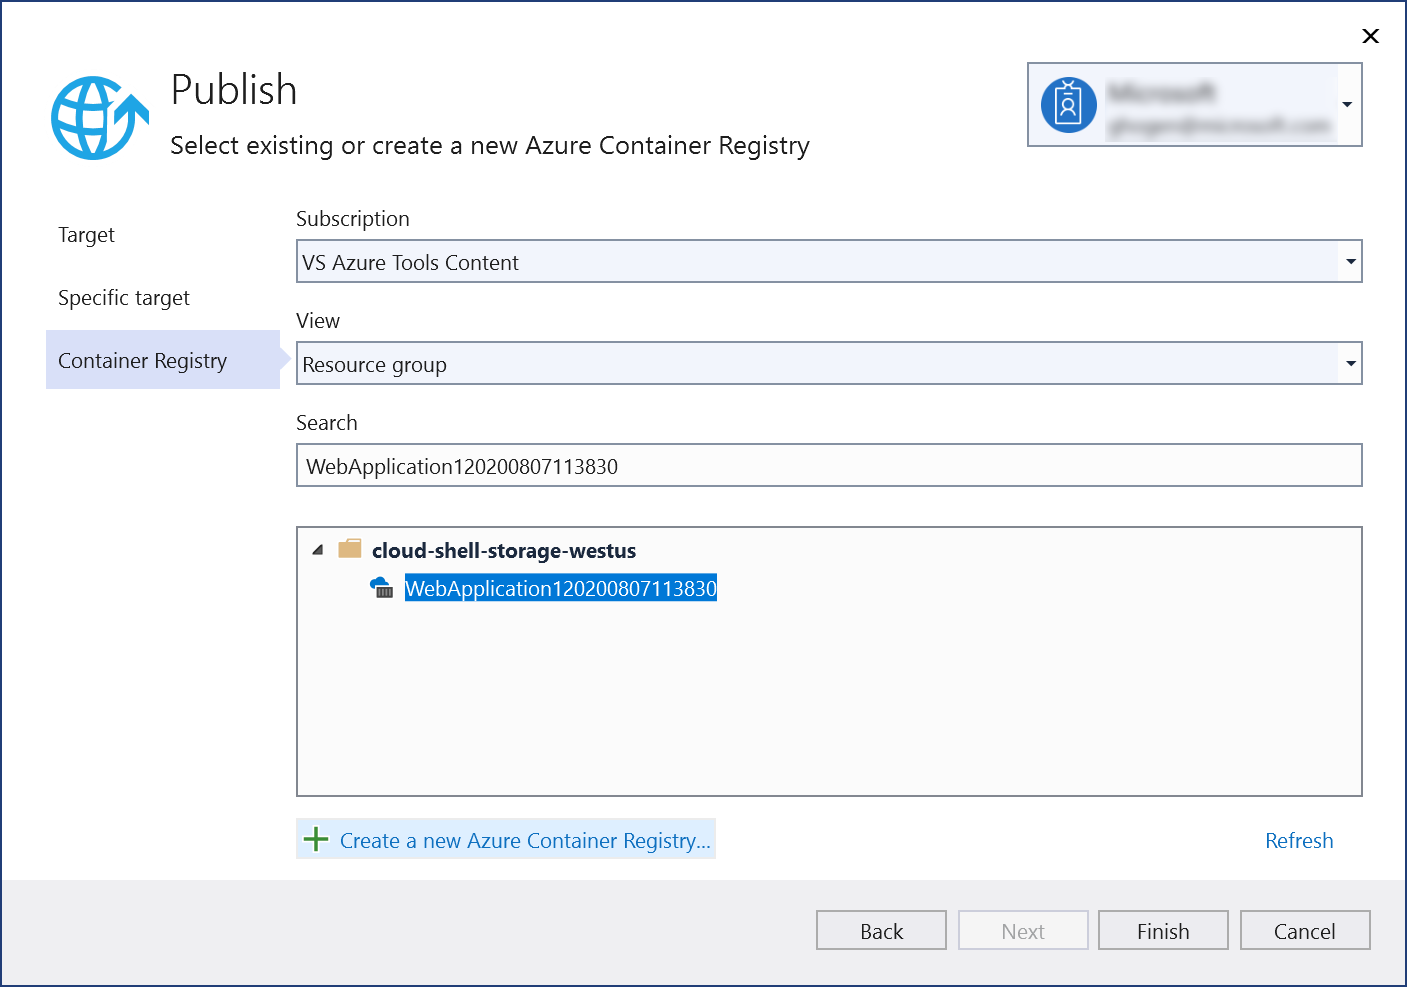 Screenshot of Publish dialog showing Azure Container Registry created.